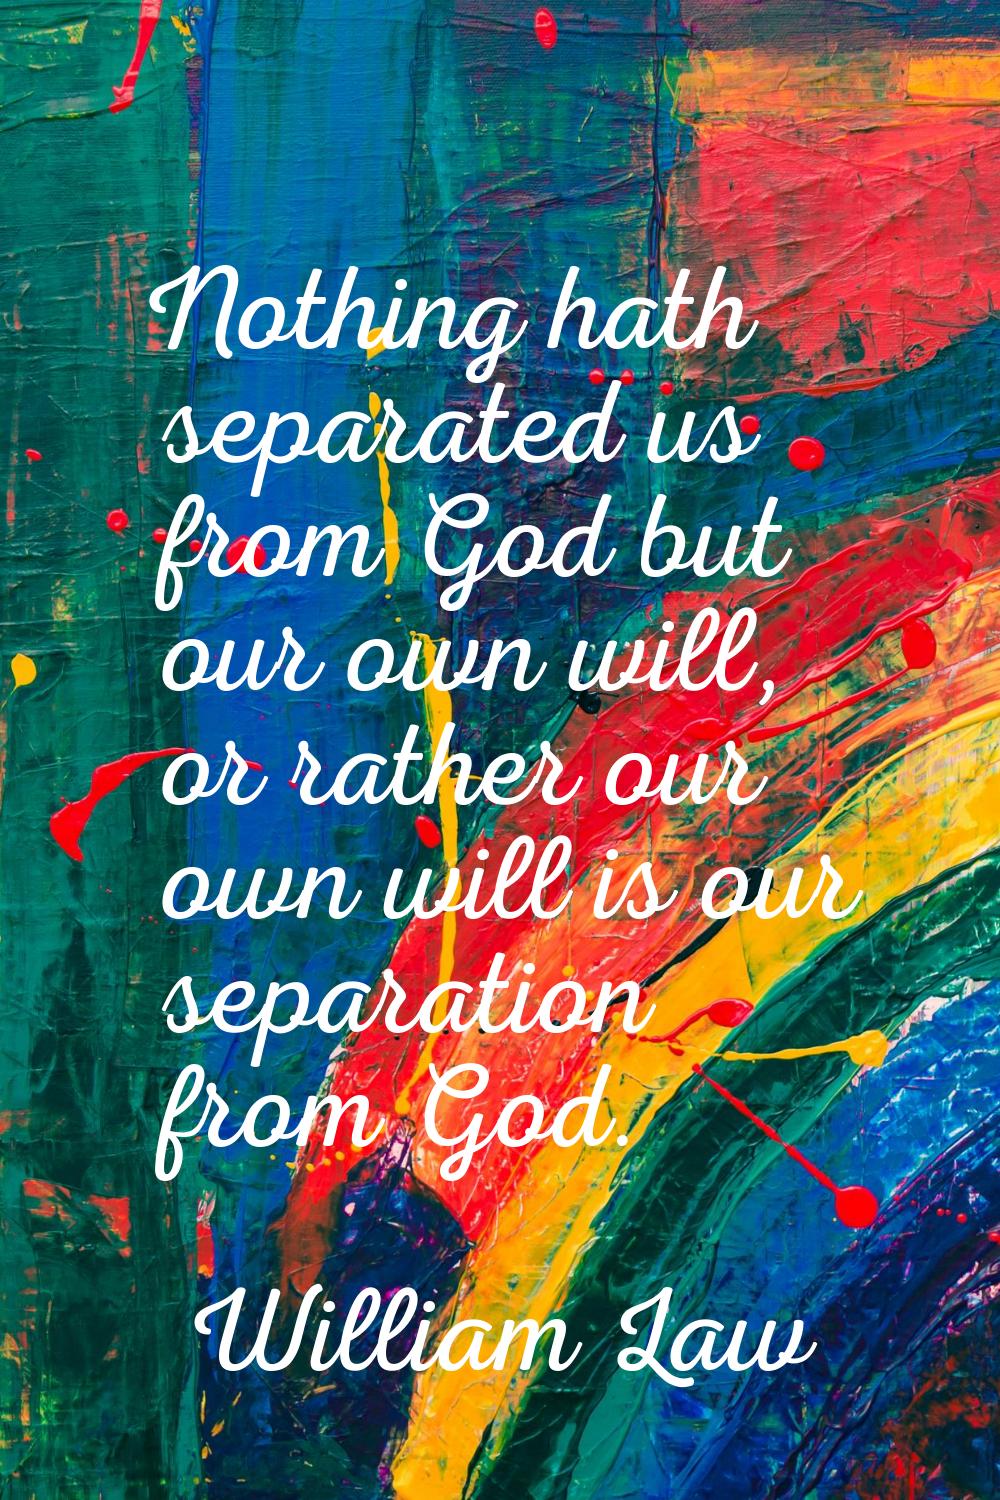 Nothing hath separated us from God but our own will, or rather our own will is our separation from 